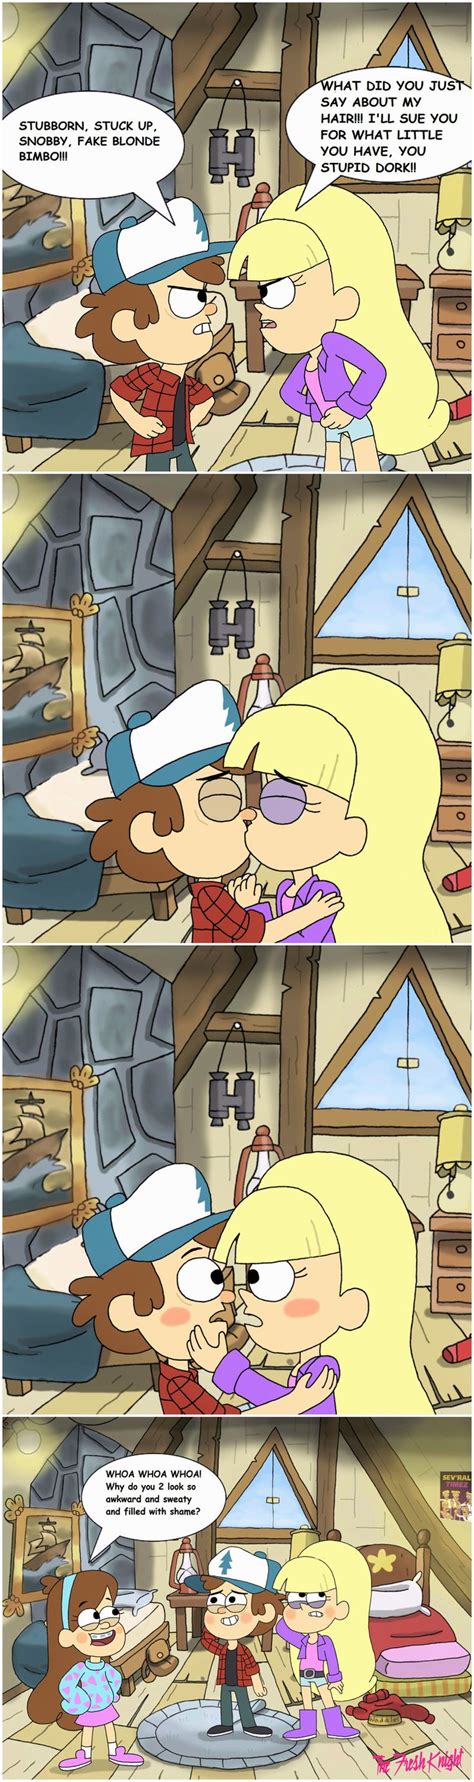 Dipper x pacifica, a requested comic dub :)\r\rcredit is given to respective artists \r\rfeel free to comment, but nothing mean! 110 best Dipcifica images on Pinterest | Summer, Reverse ...